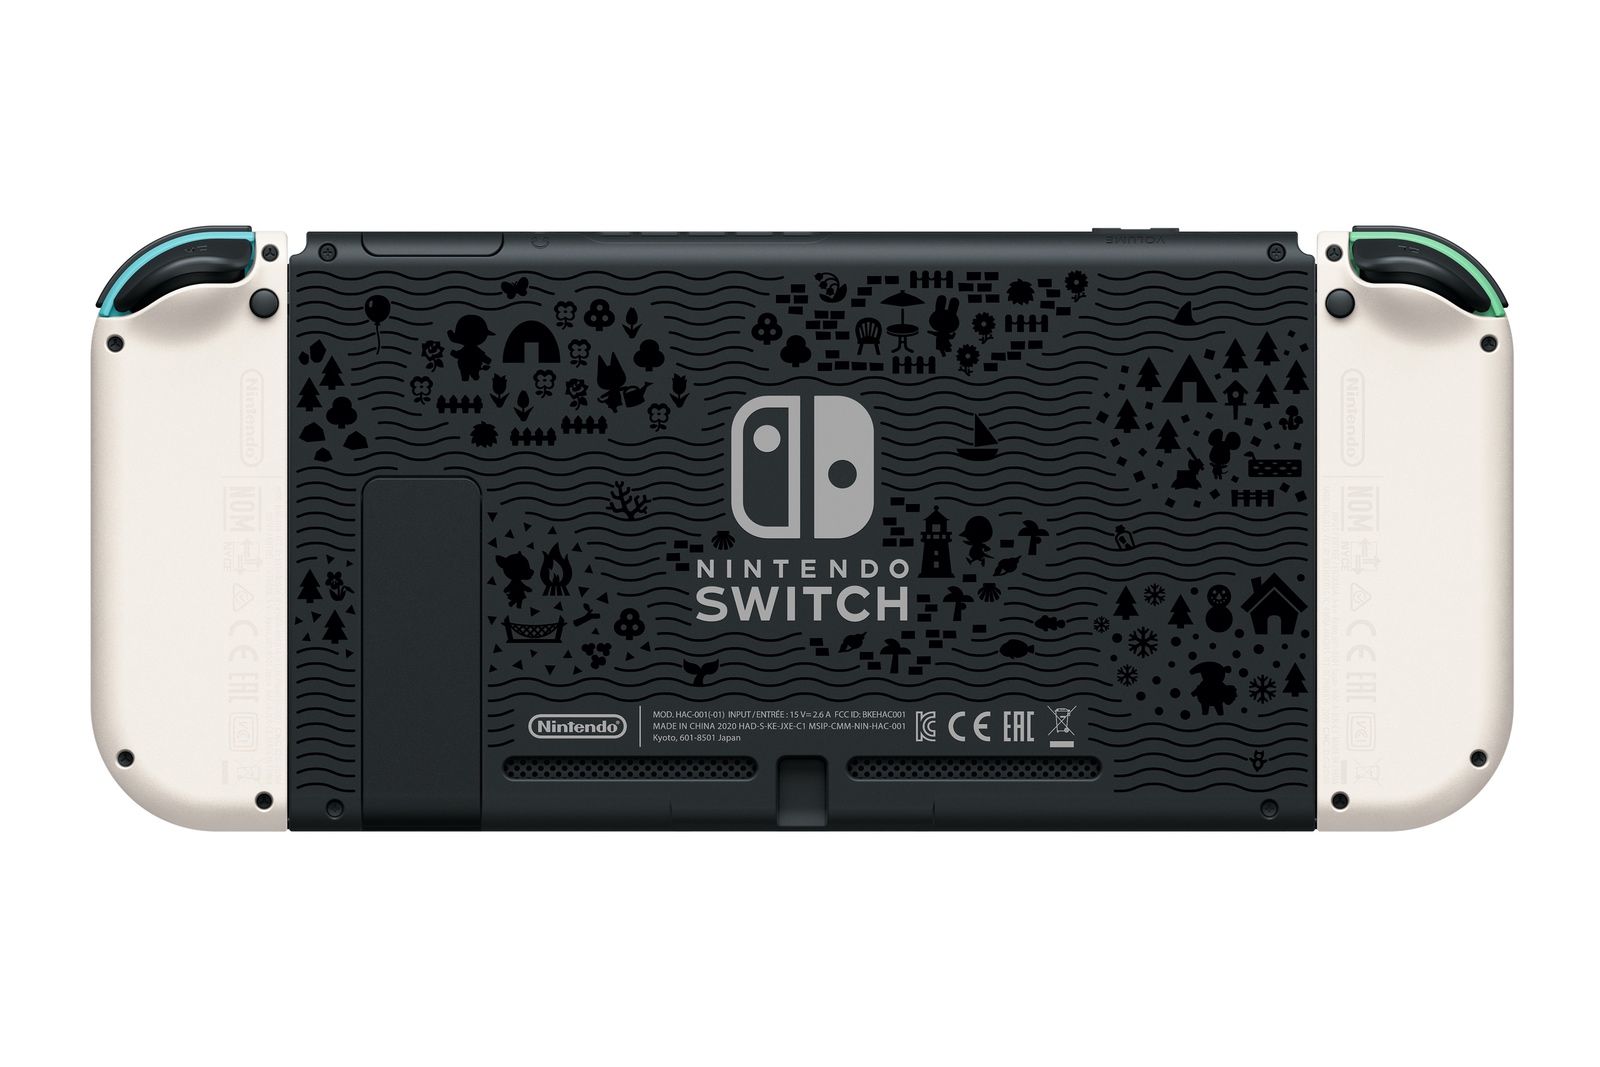 Nintendo unveils a gorgeous limited edition Switch for Animal Crossing New Horizons image 1